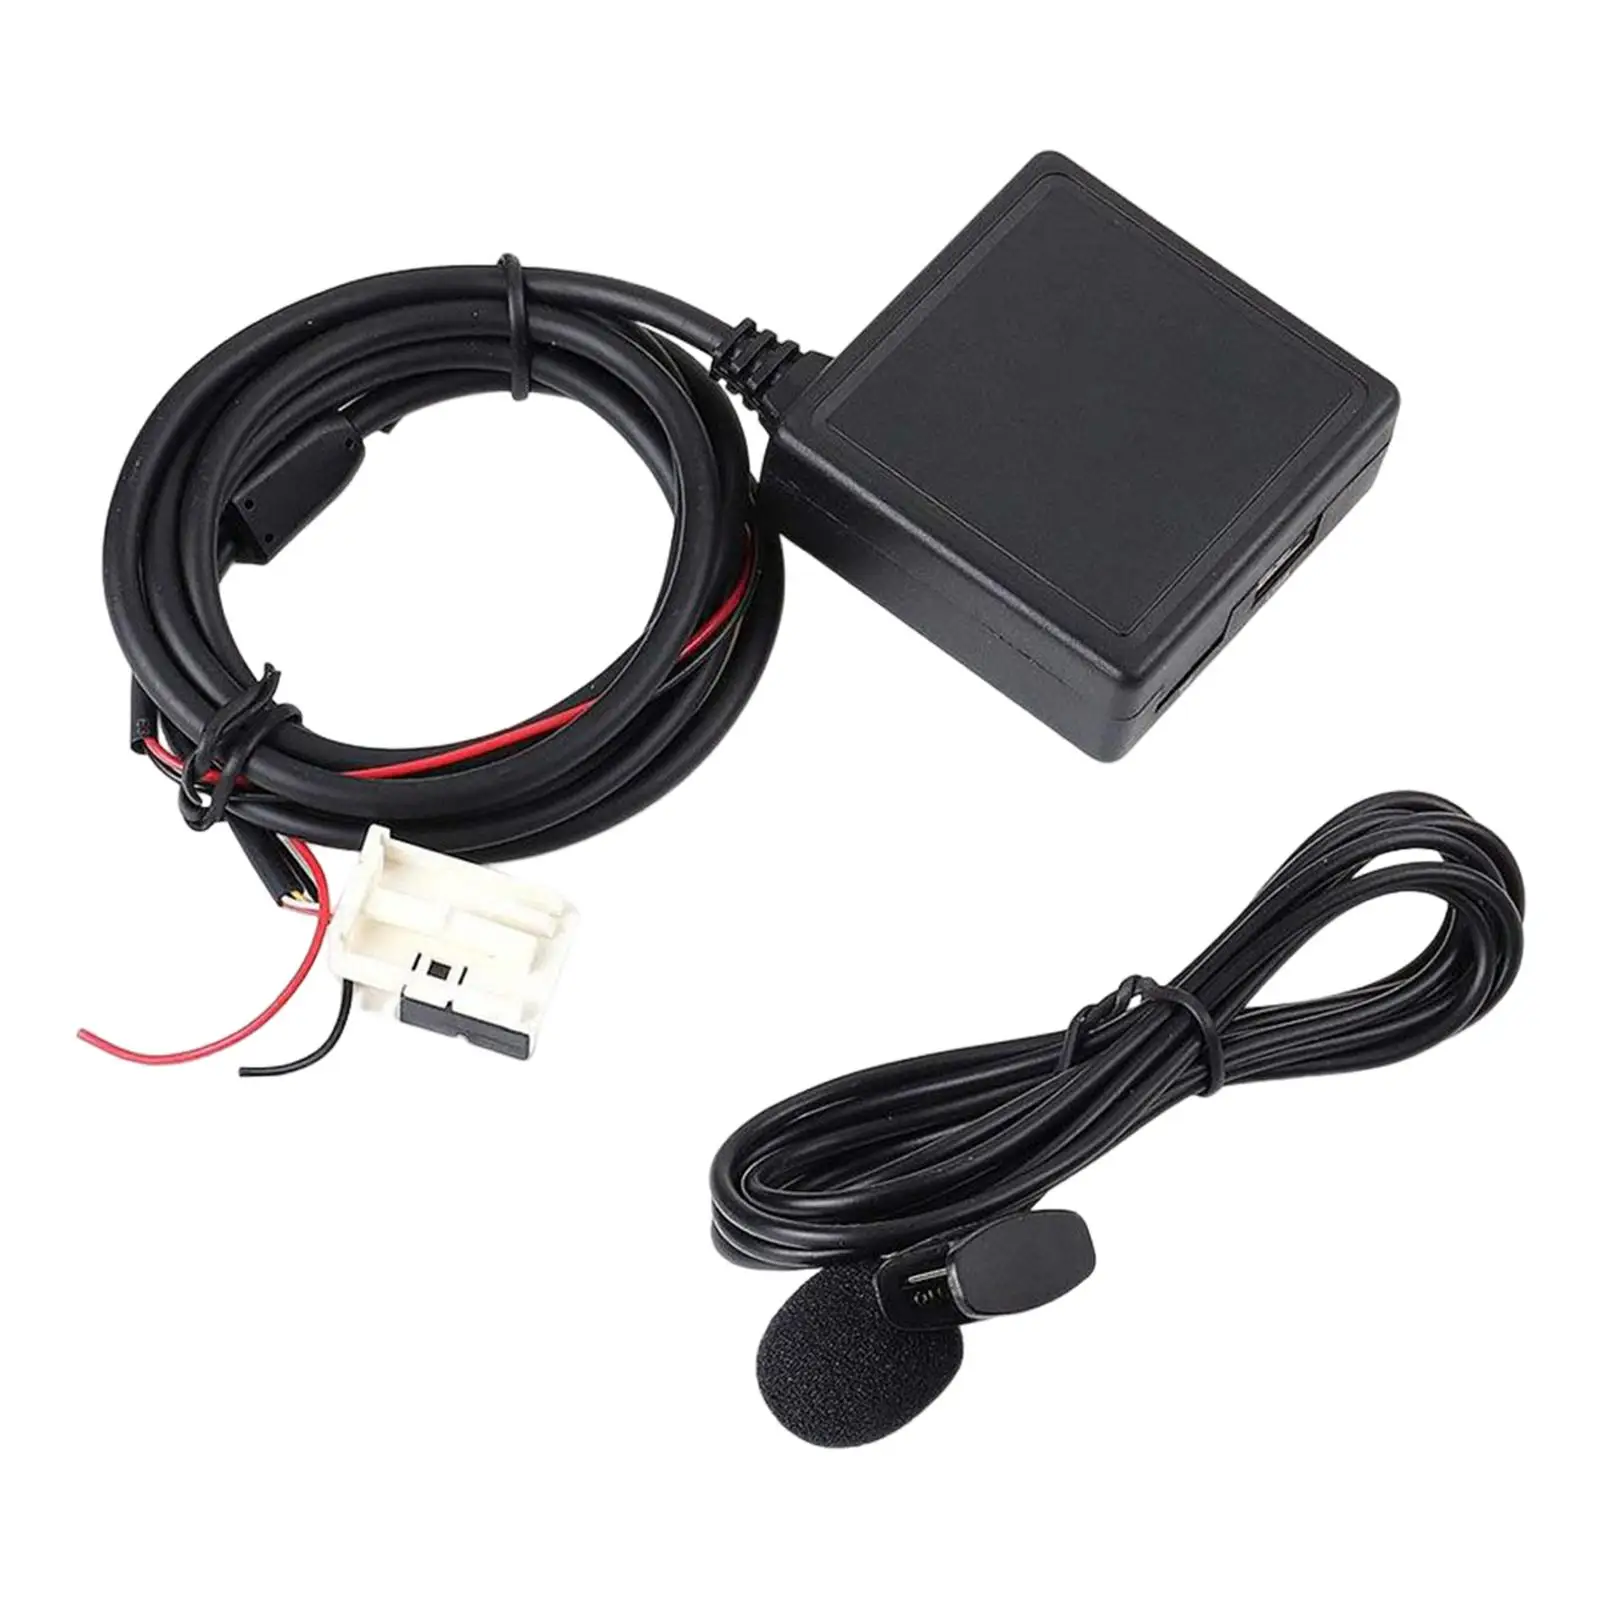 Auxiliary Audio Converter with Microphone Accessories Support Handsfree Call AUX Cable Adapter for E91 E92 E60 E90